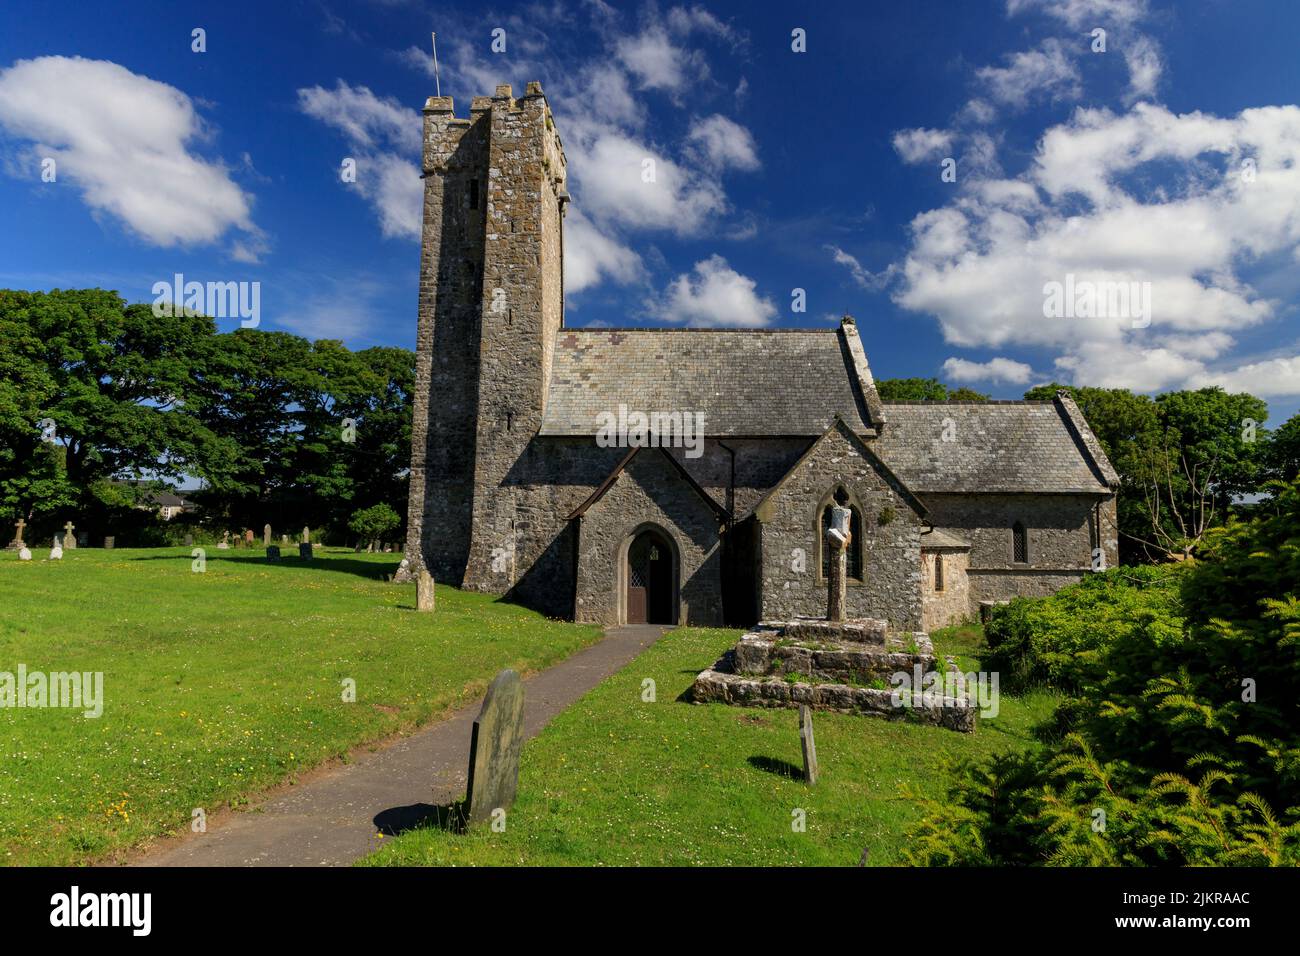 The late 13th century church of St Michael and All Angels in Bosherston has distinctive Norman architecture, Pembrokeshire, Wales, UK Stock Photo